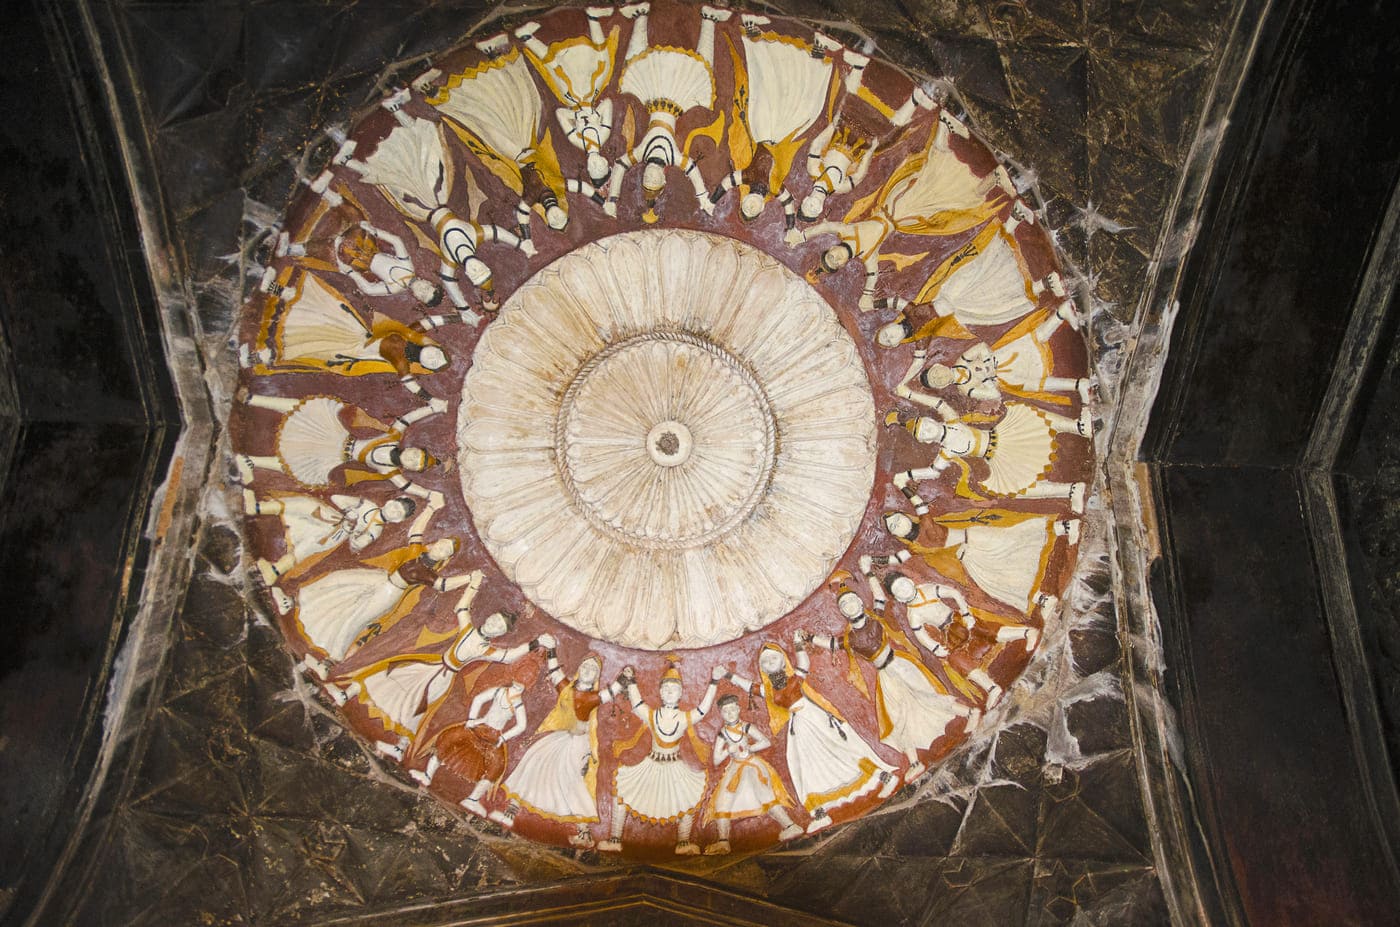 An ancient painting on the ceiling of the Datia Palace, inspired by Sufi traditions and customs which enamoured the Mughal kings, Madhya Pradesh 